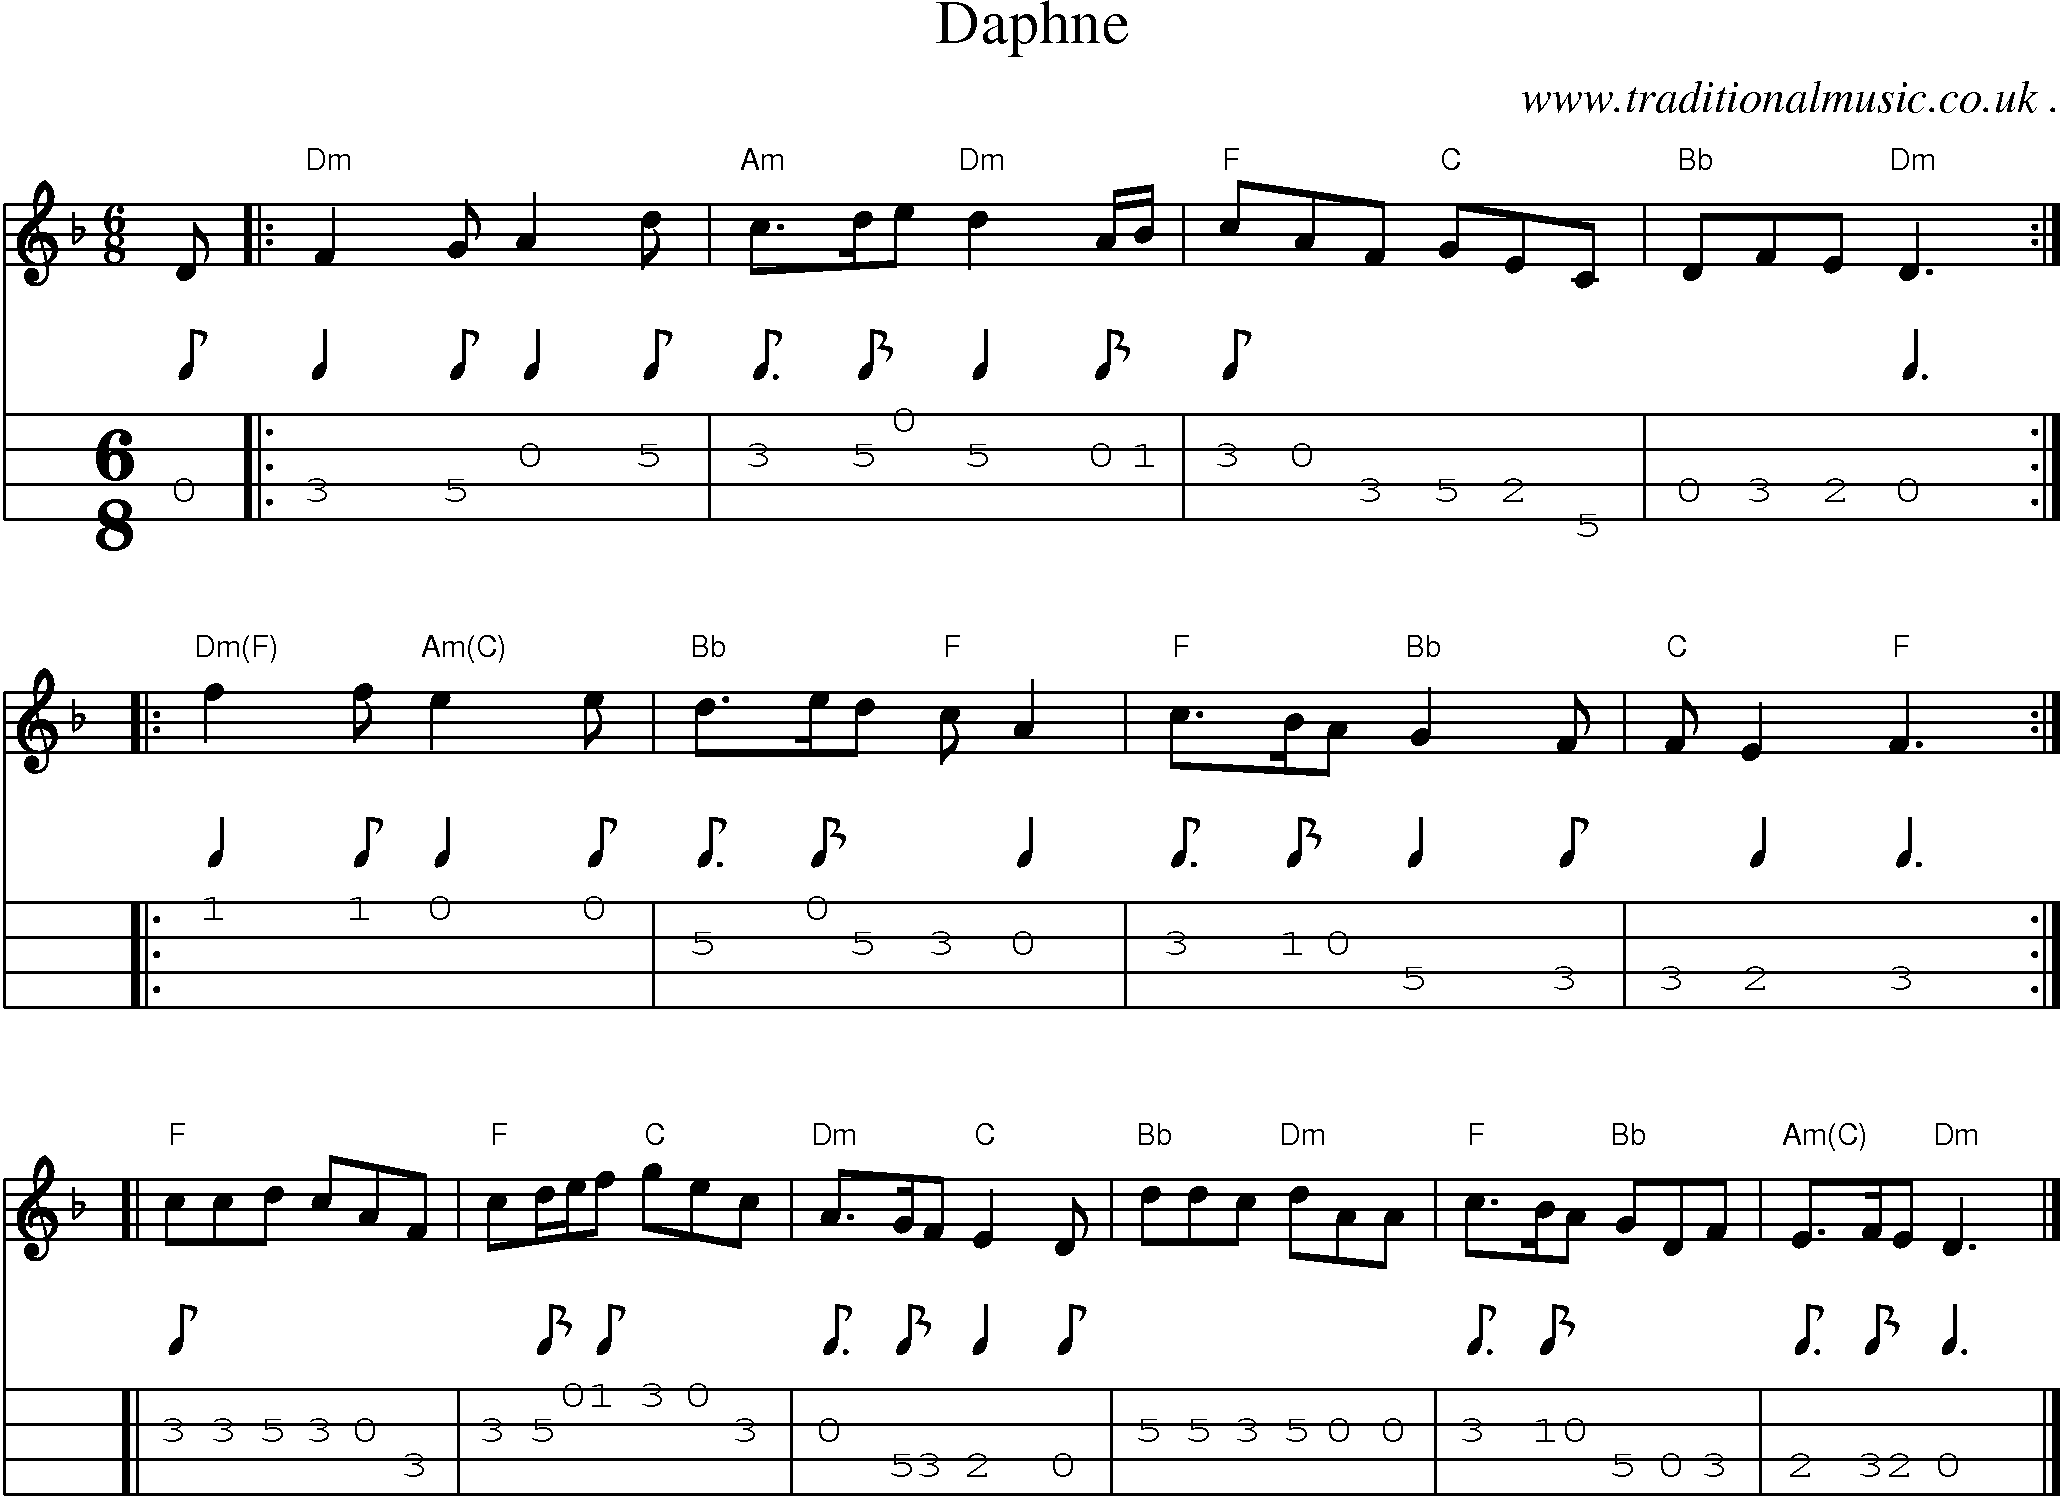 Sheet-music  score, Chords and Mandolin Tabs for Daphne